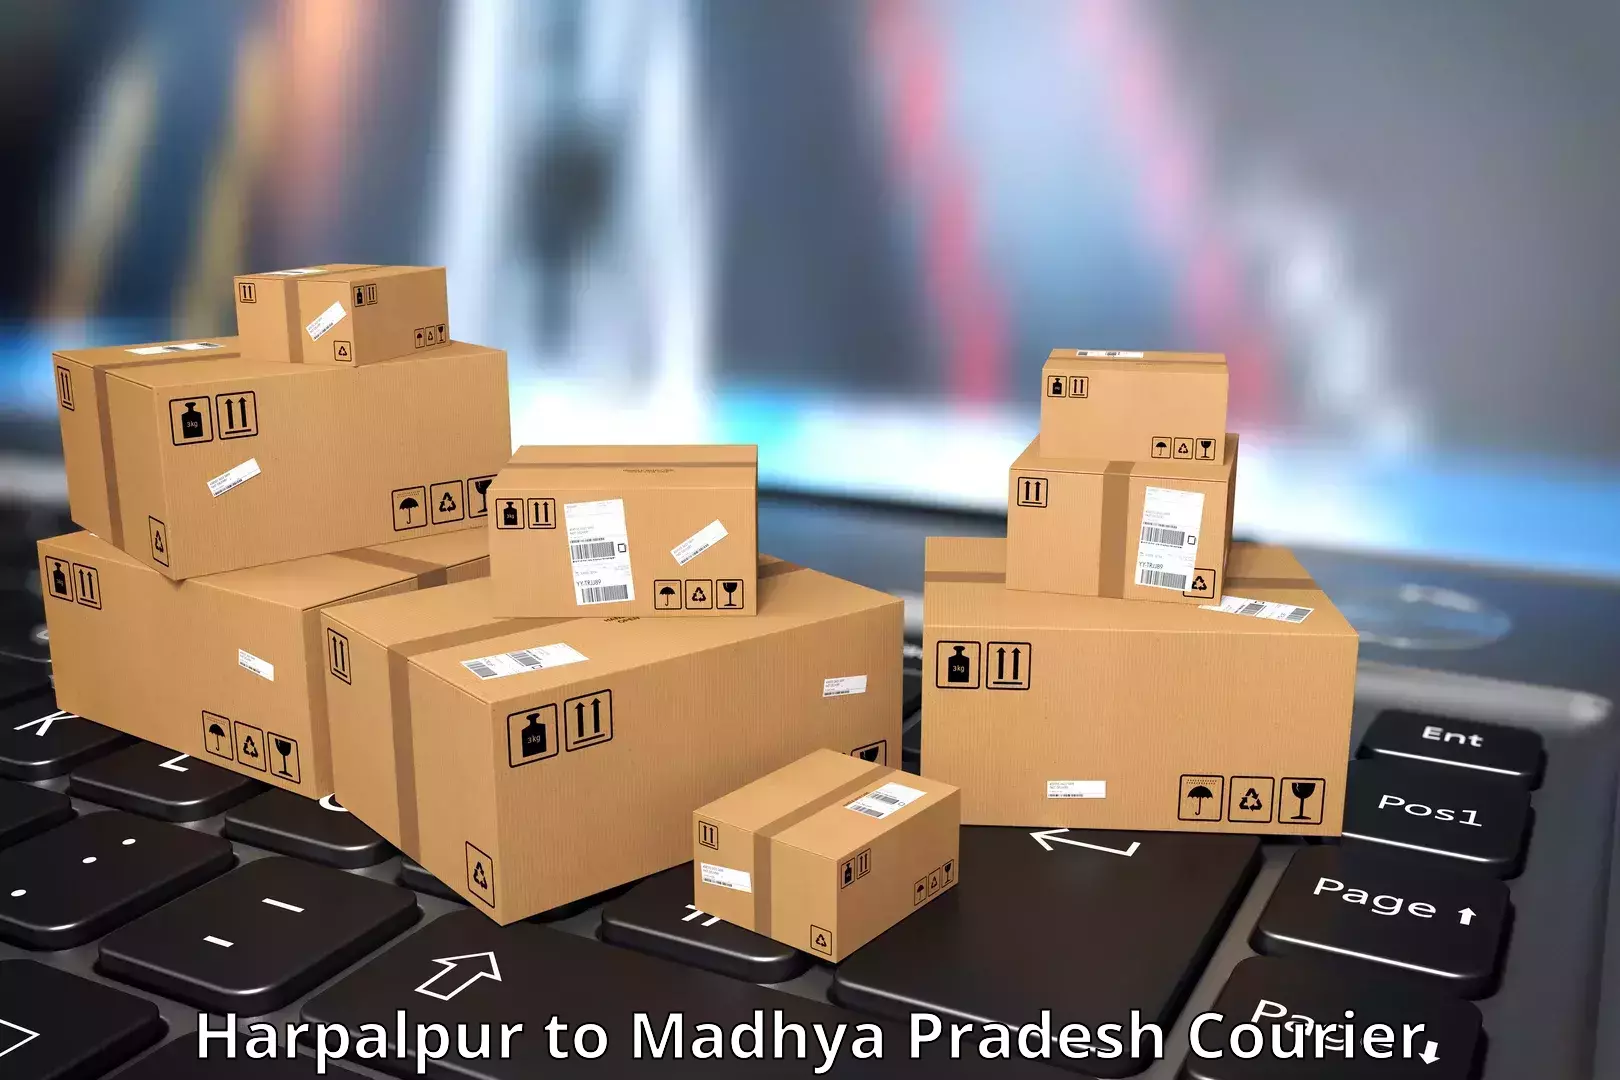 Parcel service for businesses Harpalpur to Madhya Pradesh